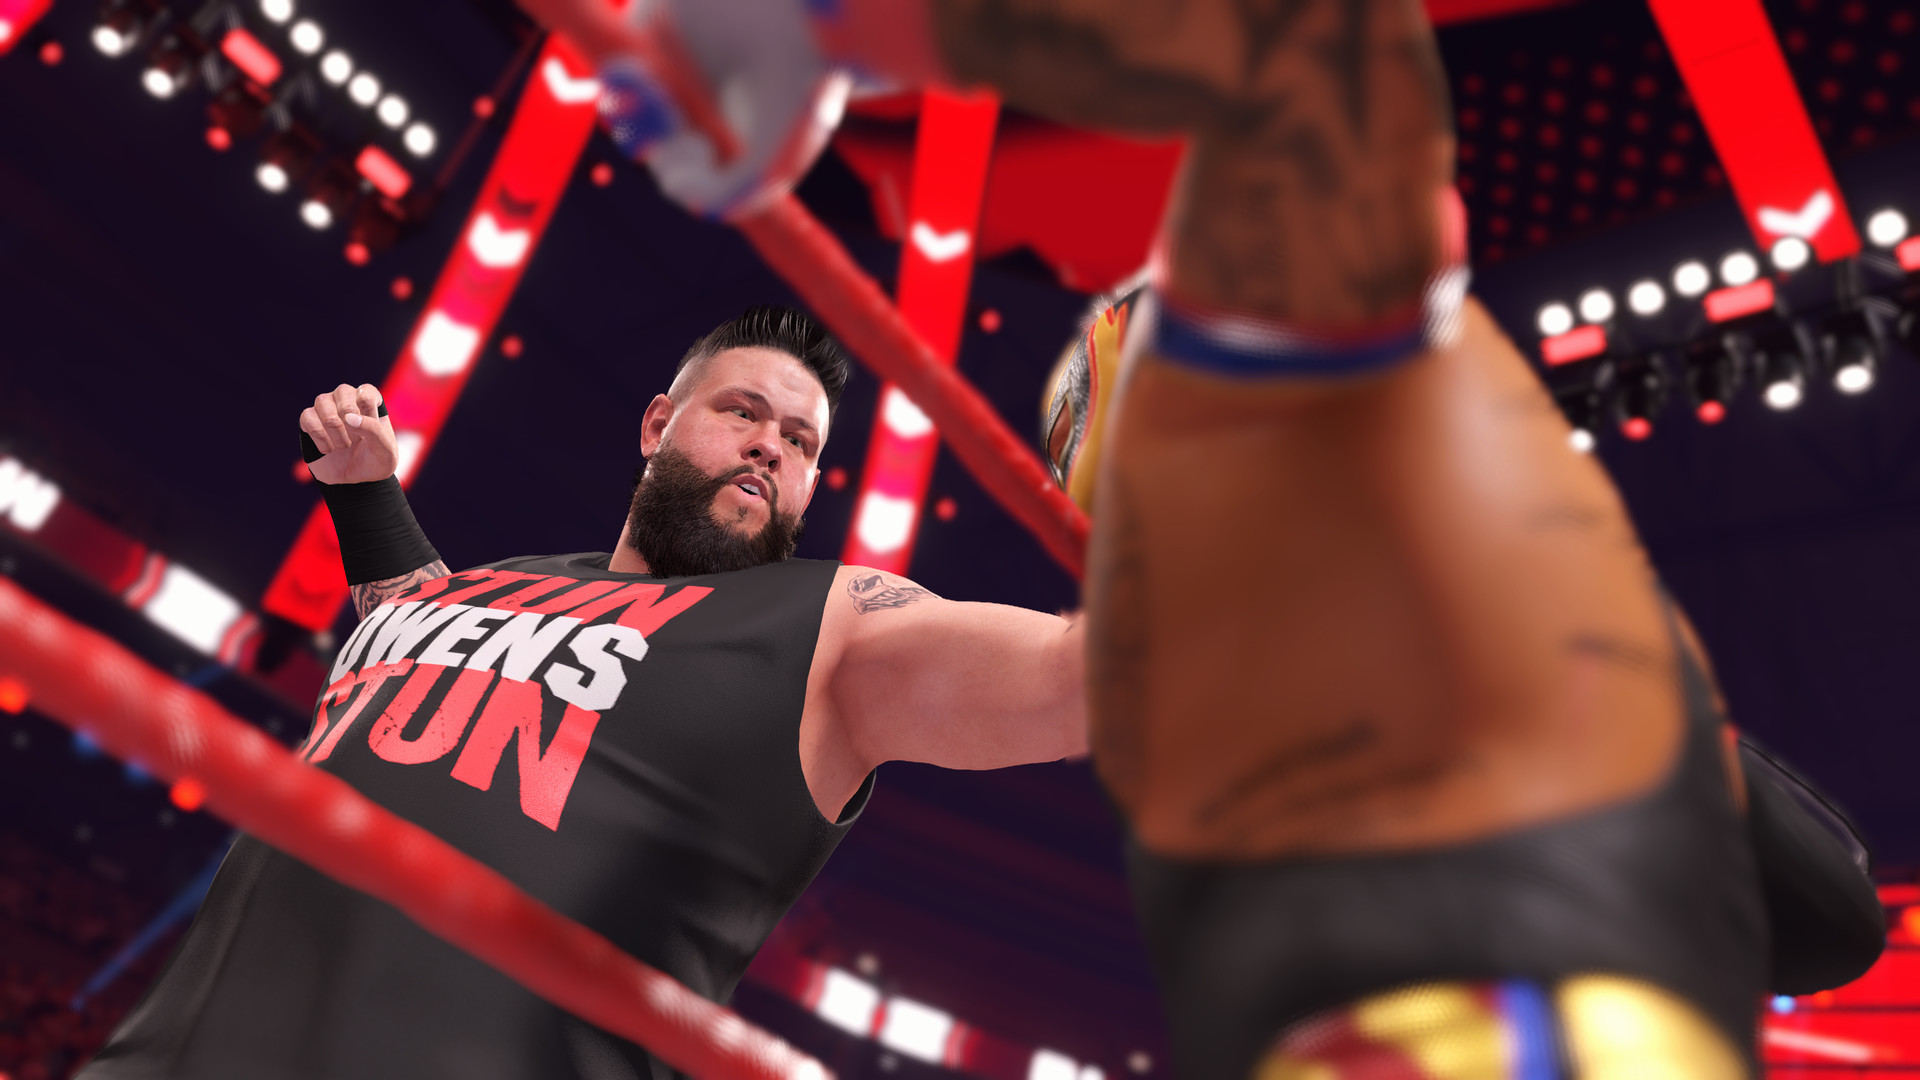 2K Unveils Top-10 Hit List of Features and Innovations Coming to WWE® 2K22  in March